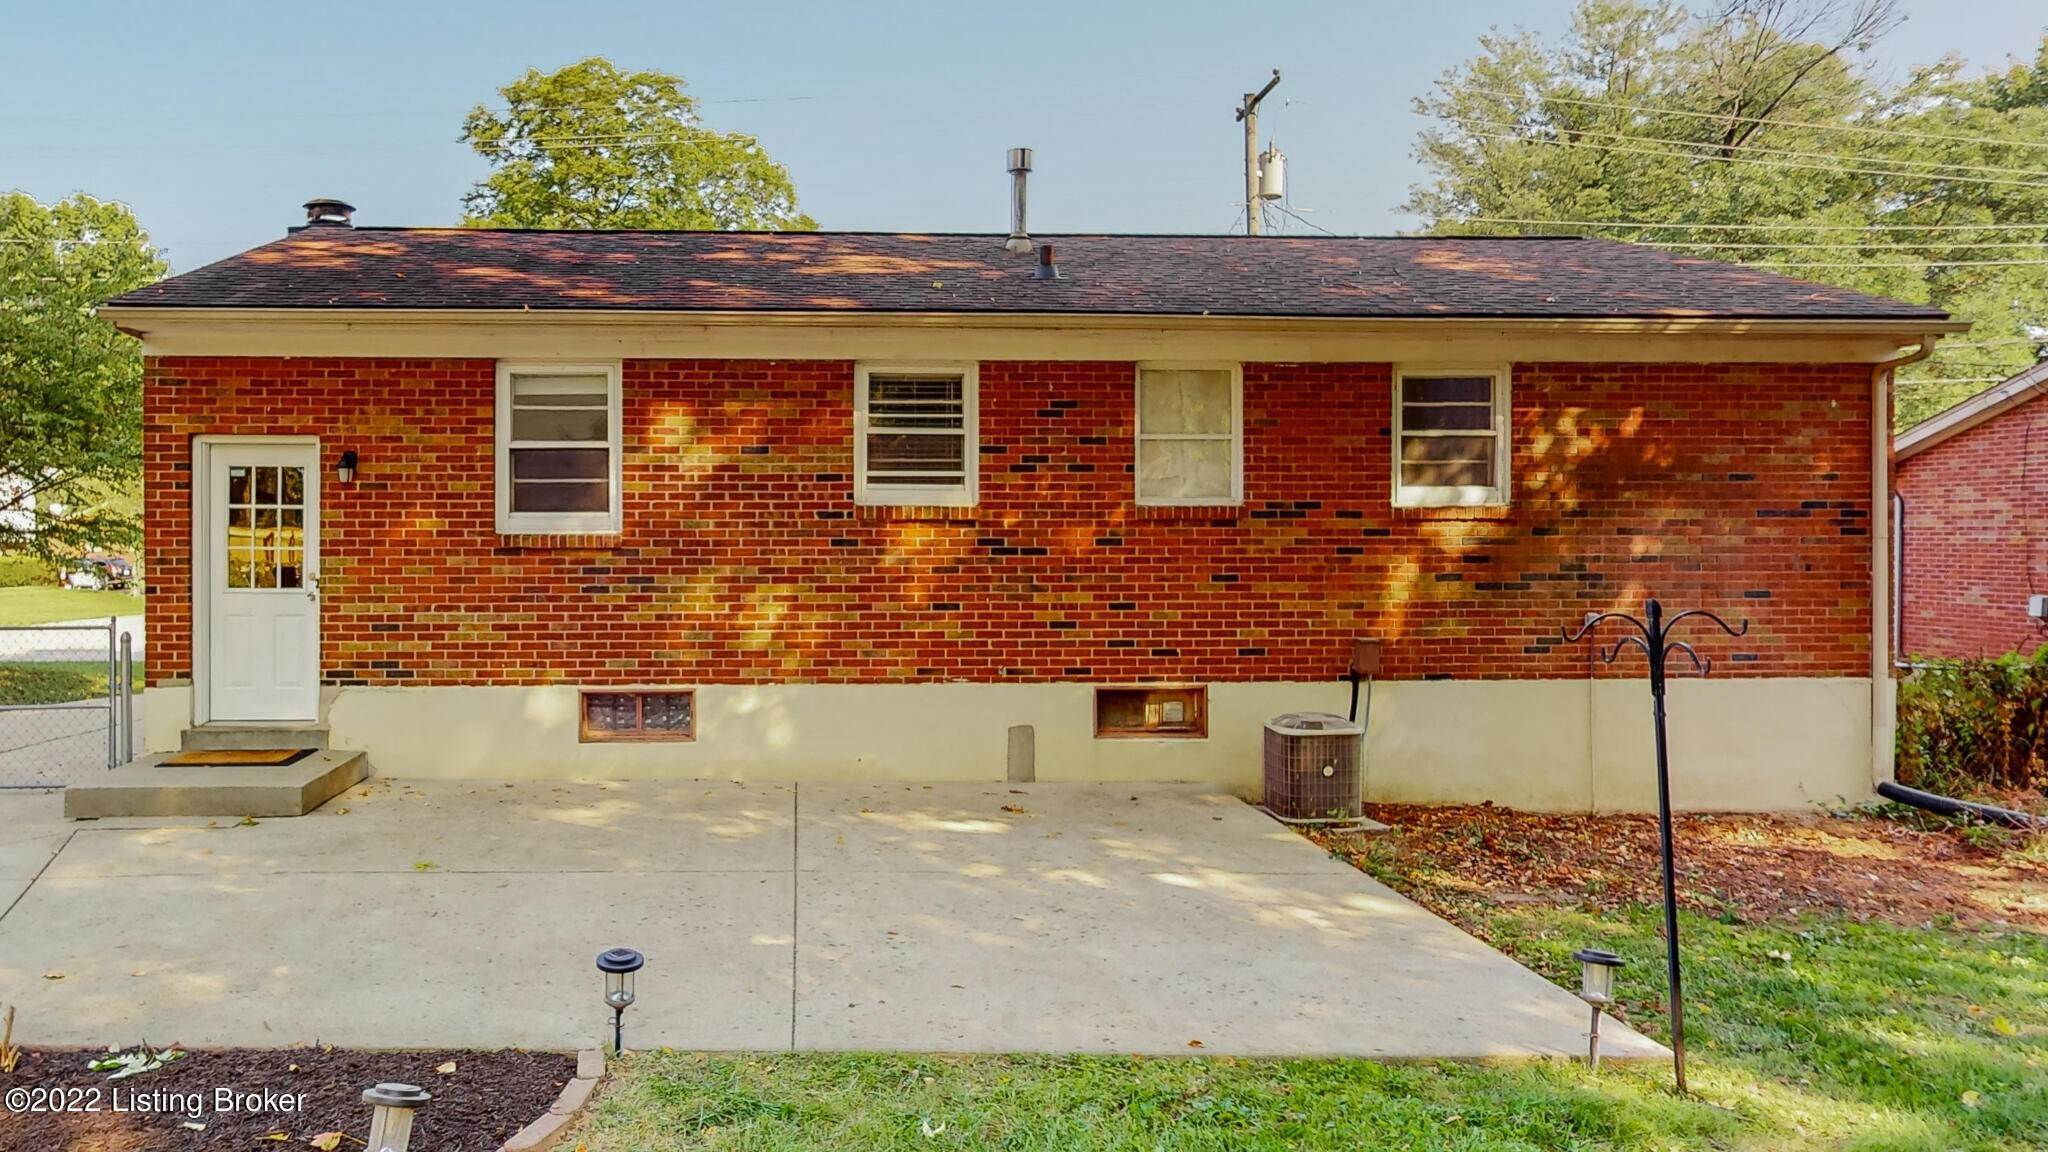 39. Single Family at Louisville, KY 40291